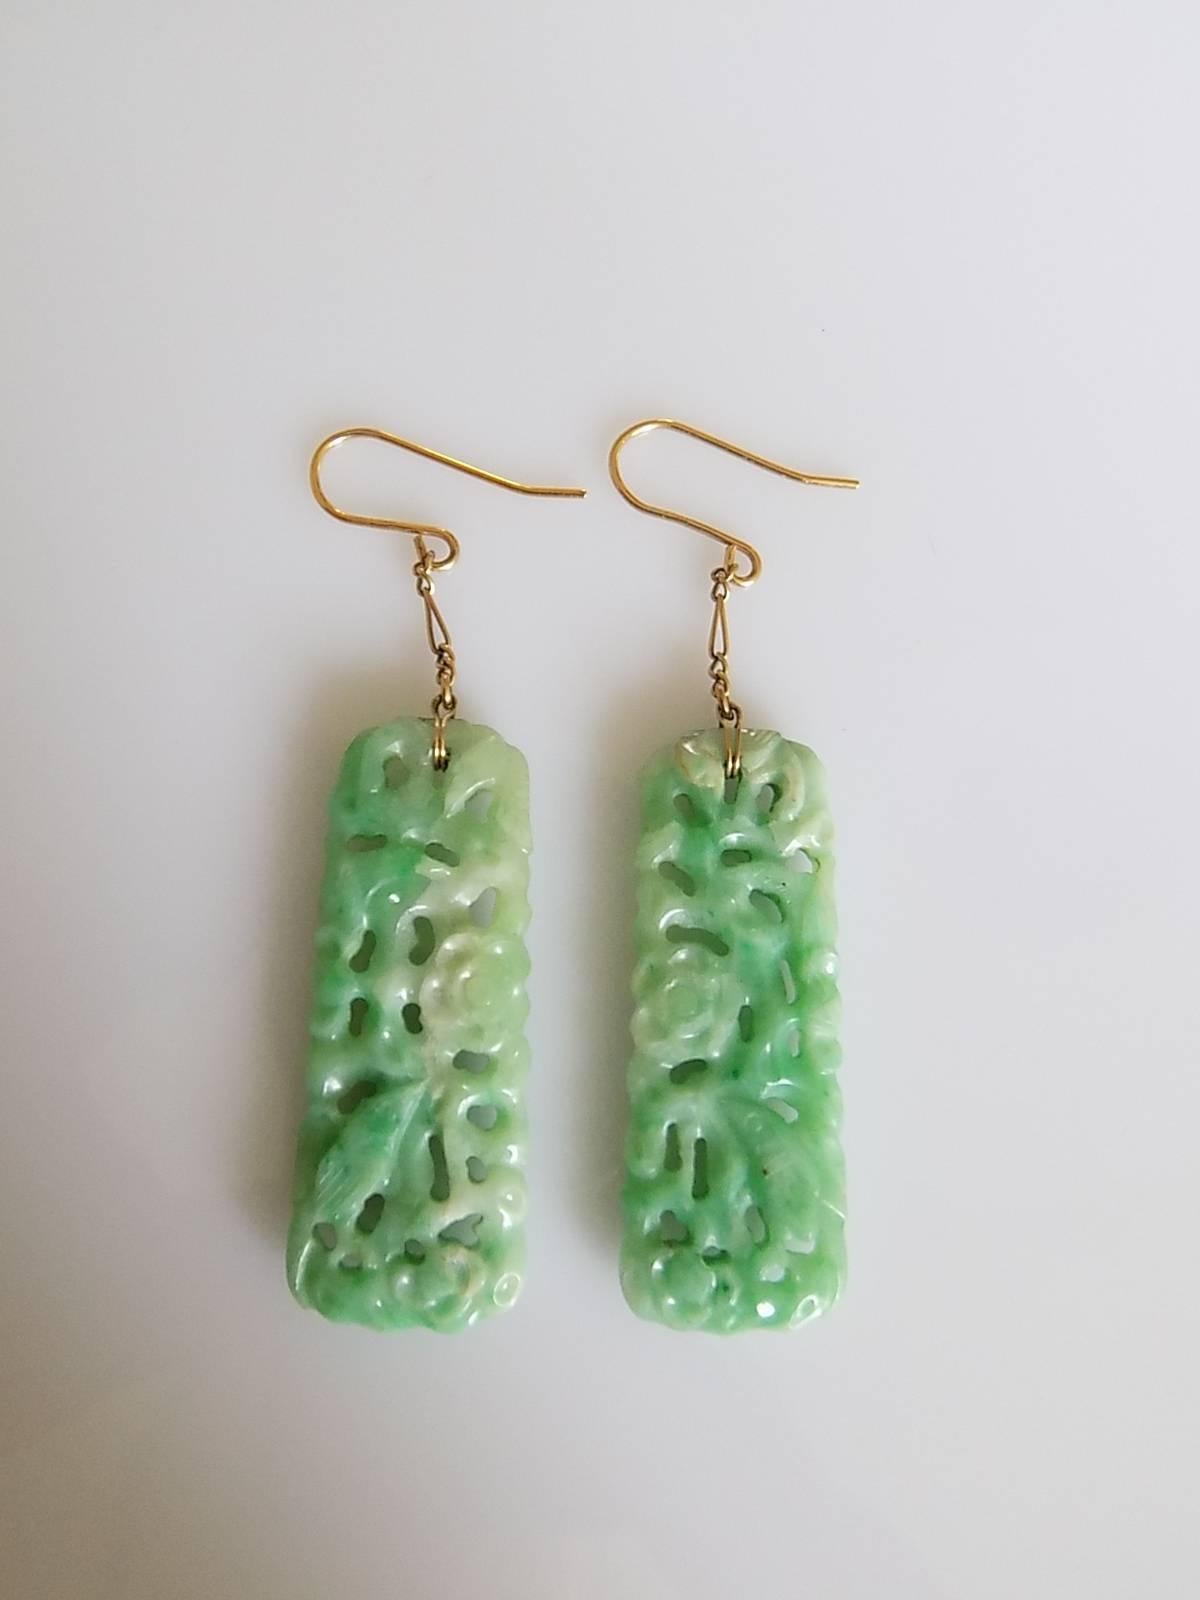 A Spectacular Art Deco c.1920s carved Jadeite Jade pendant earrings on fancy 18 Carat Gold chains (tested) and brand new 9 Carat Gold hooks (marked 375 for 9 carat gold) for pierced ears. Each earrings carved with a flowers, birds and foliage